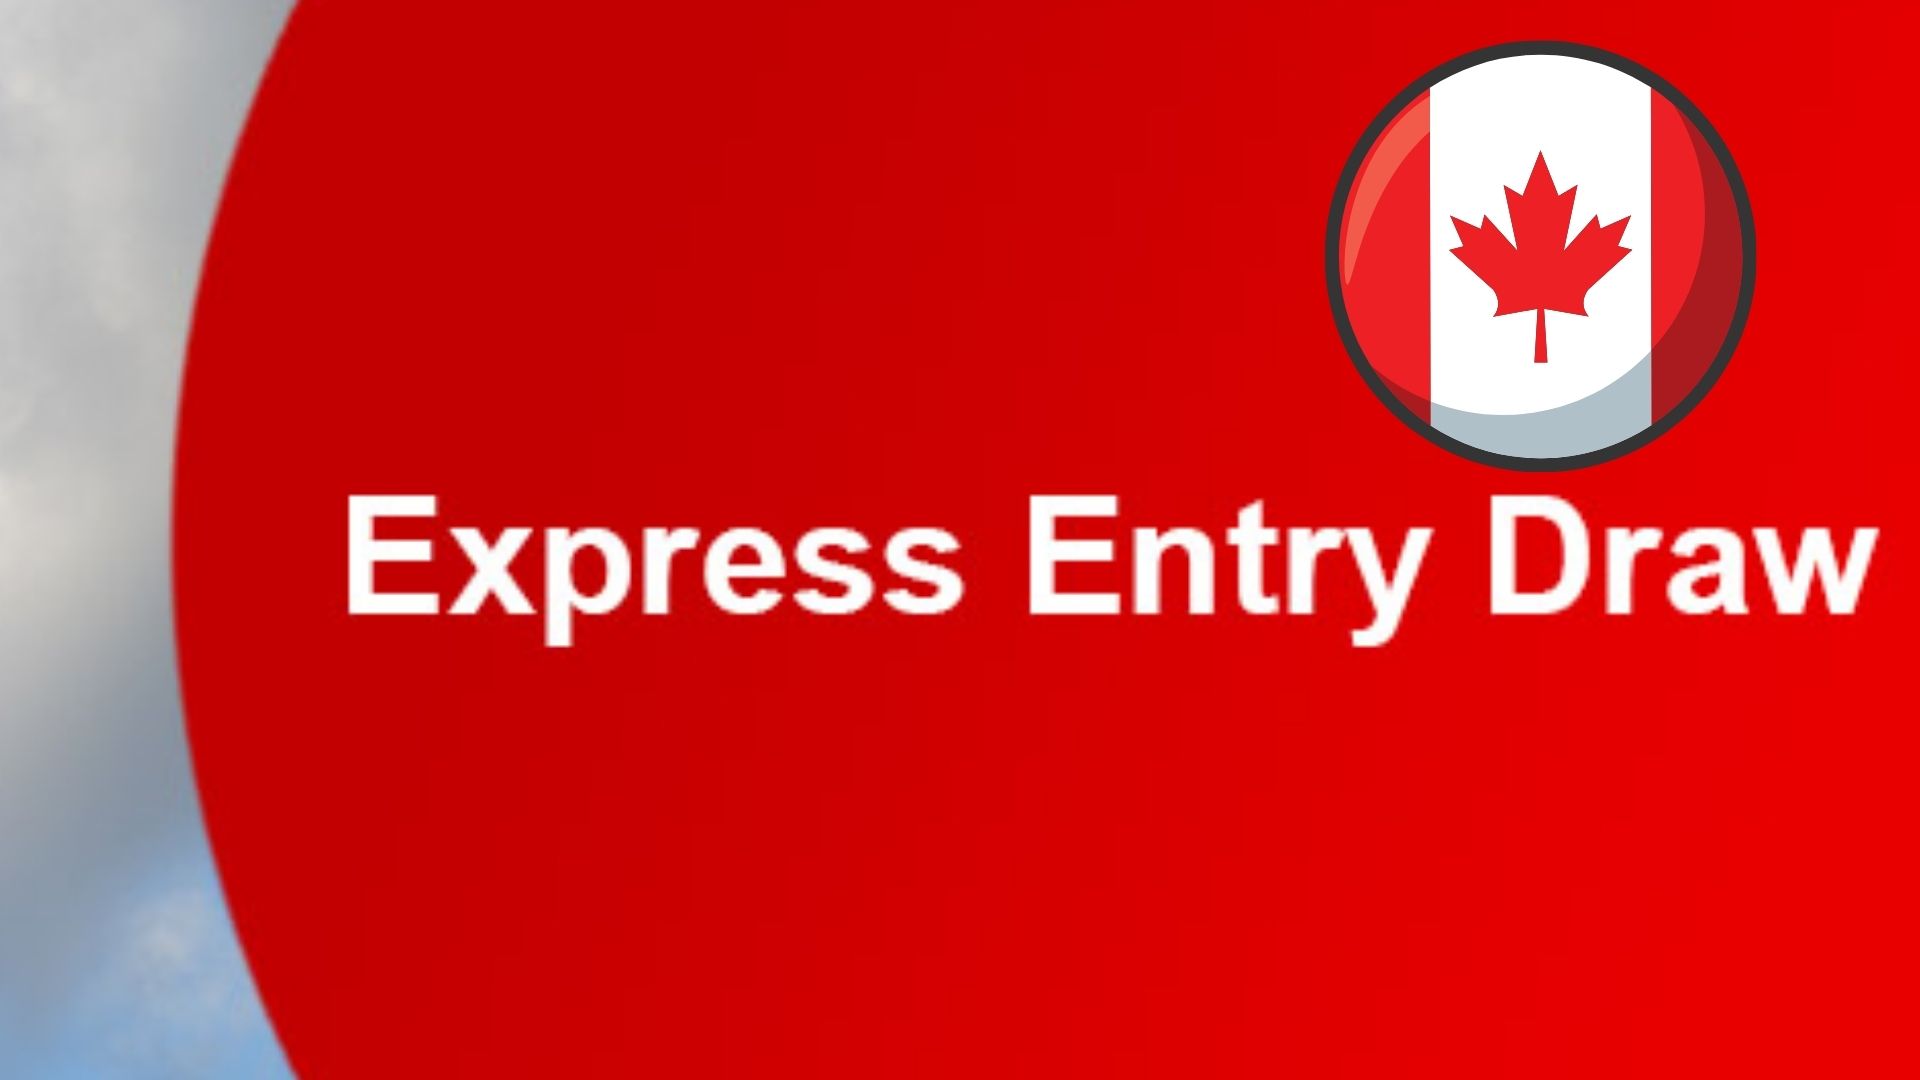 Express Entry Draw – Latest Figures